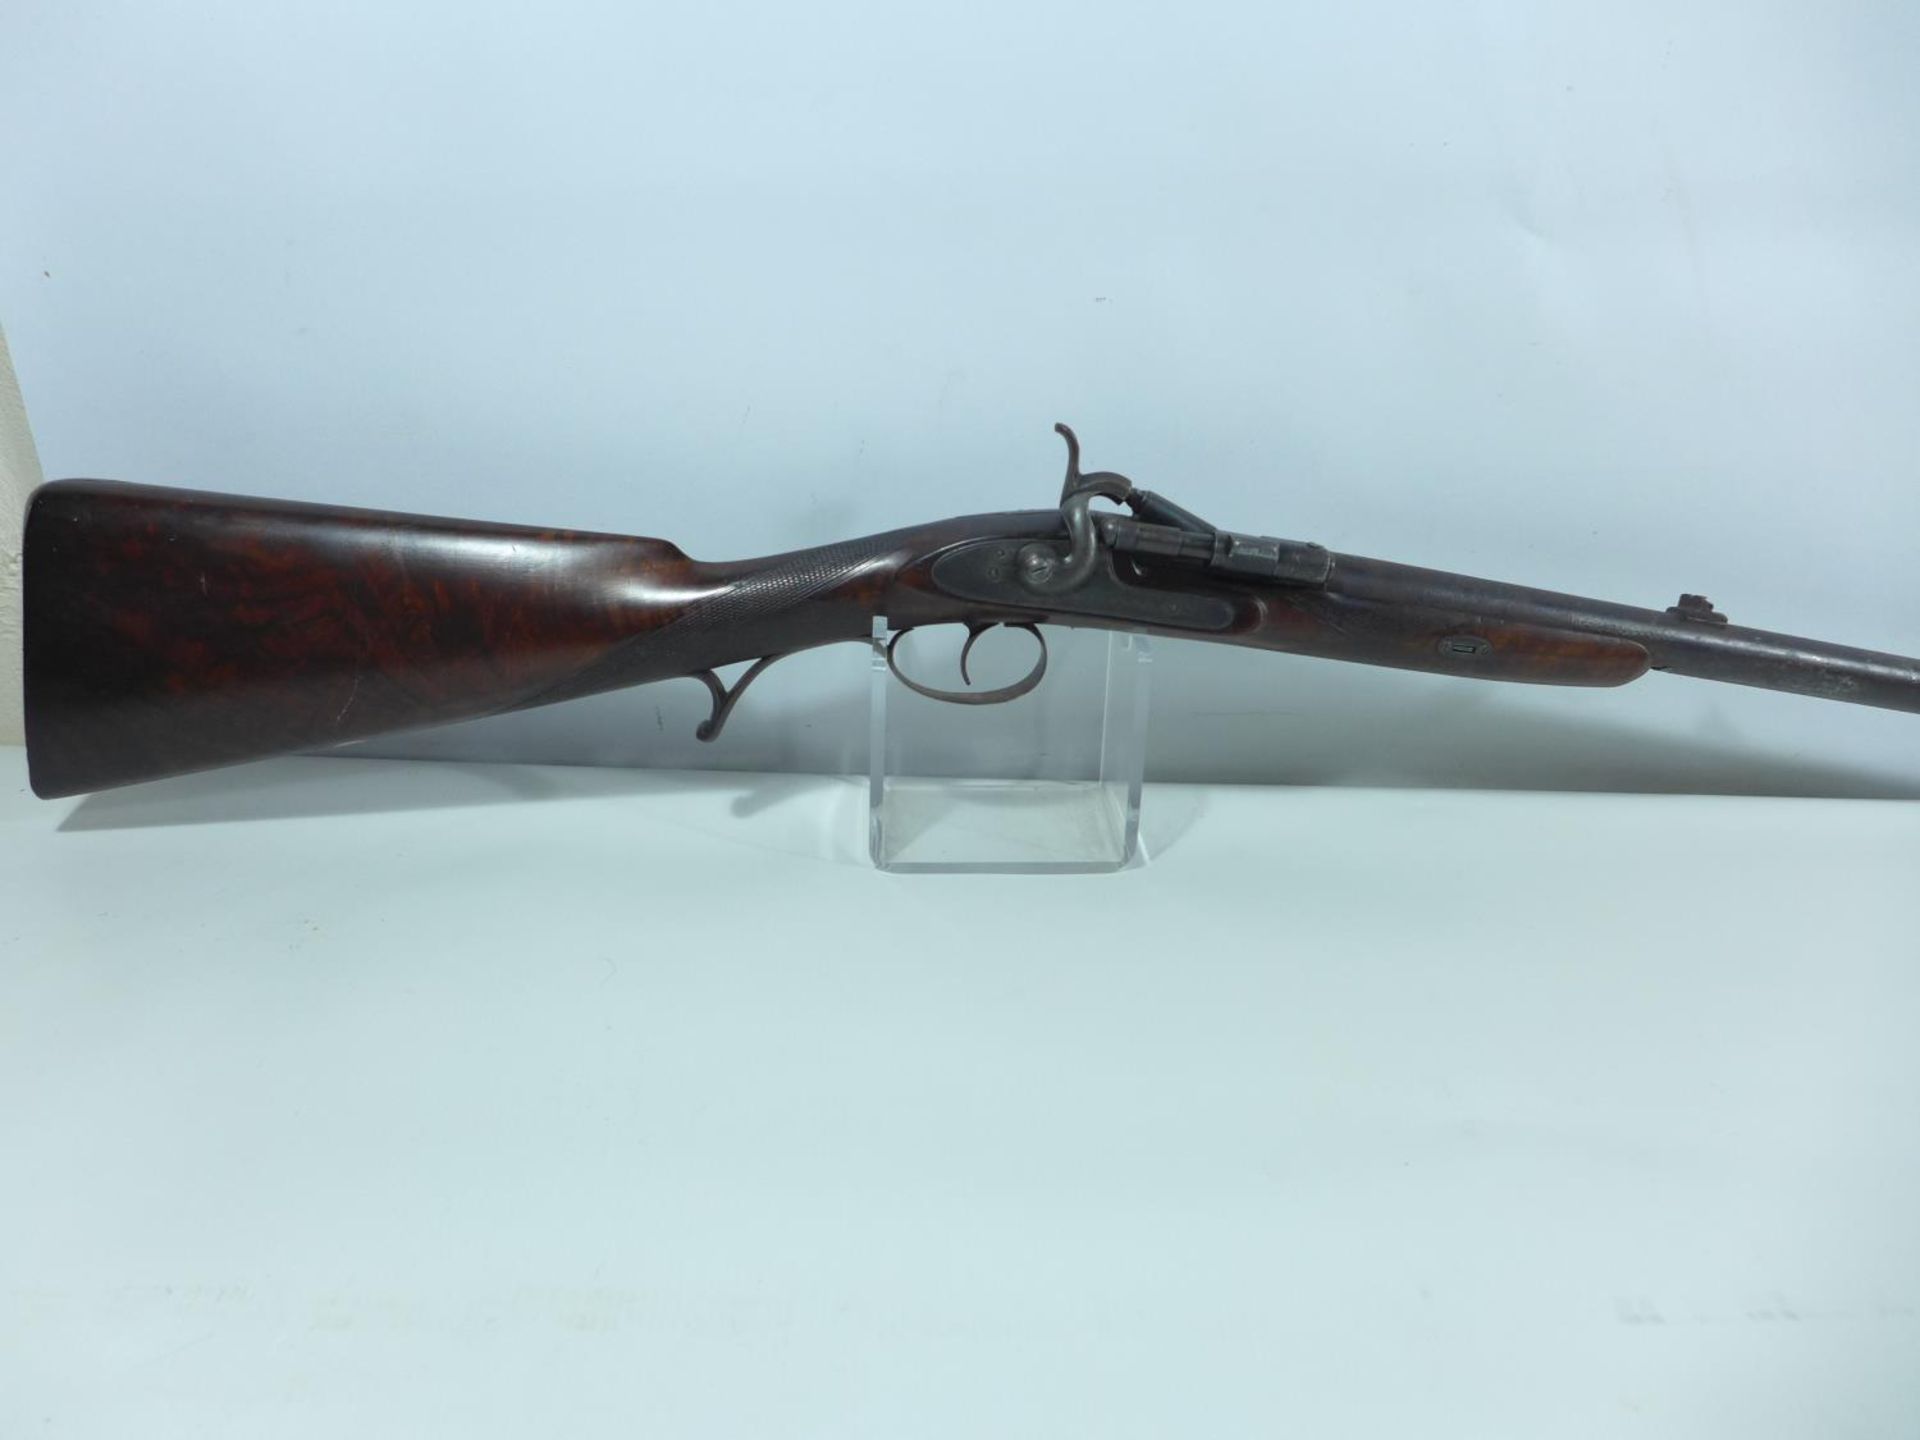 A SNYDER CONVERTED DEACTIVATED SHOTGUN, 79CM BARREL, LOCK MARKED WATSON AND SON, LENGTH 127CM - Image 2 of 8